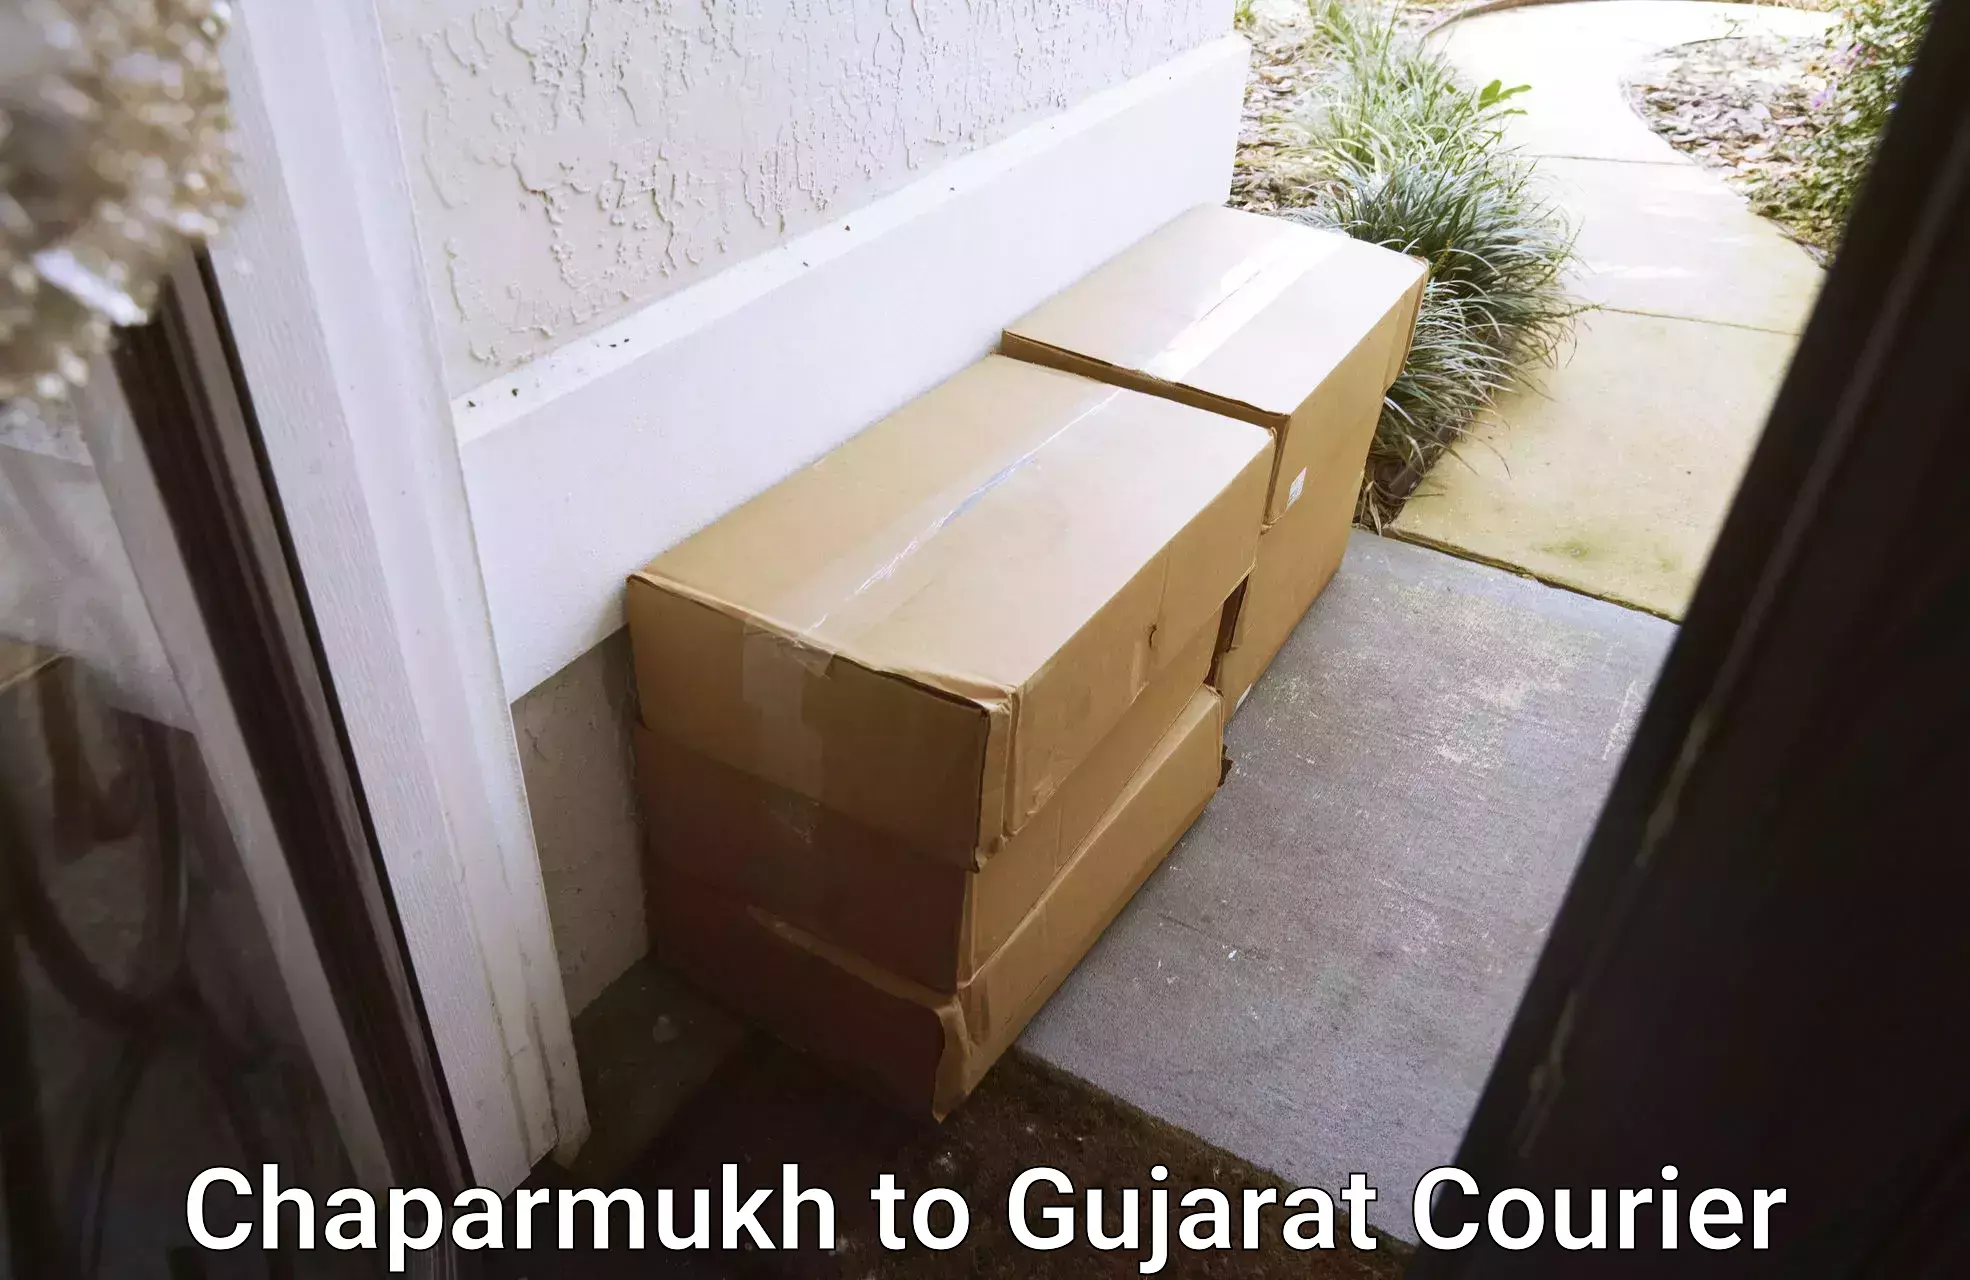 Full-service courier options Chaparmukh to Mahuva